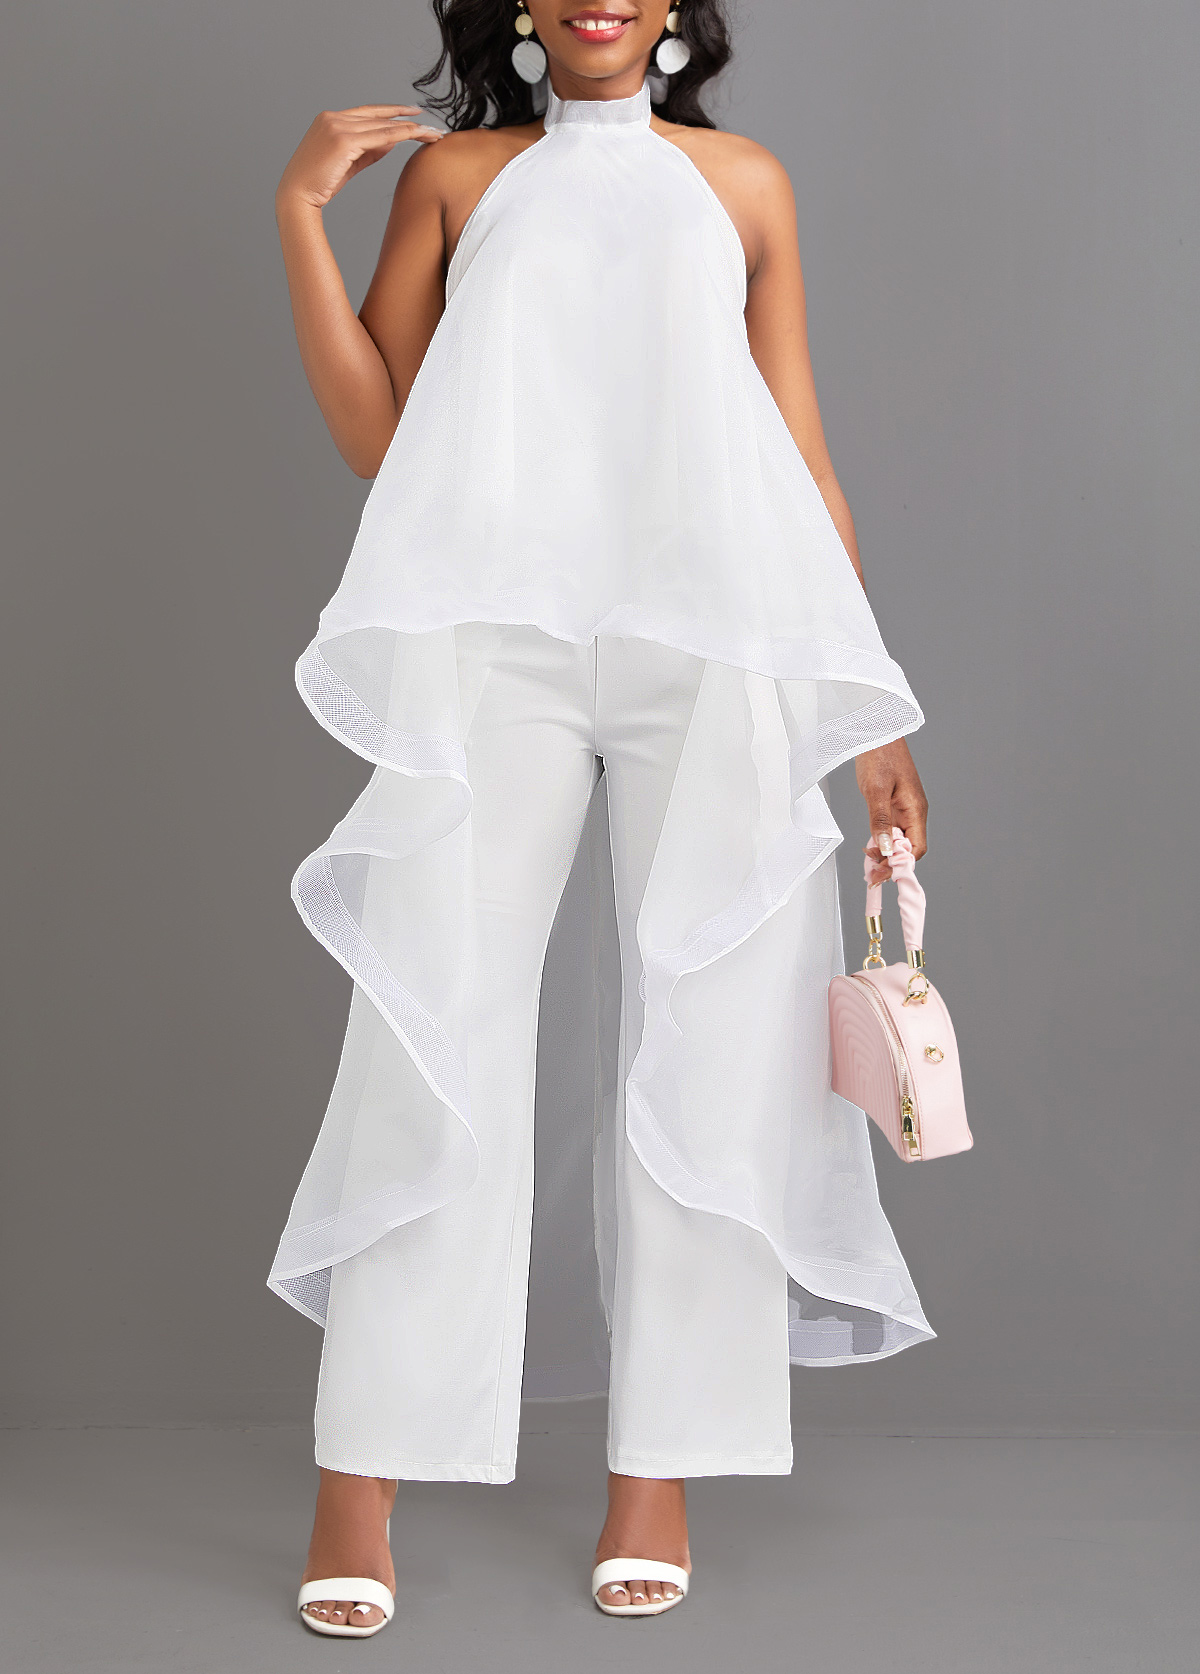 Tie Ankle Length Lace Up Collar White Top and Pants